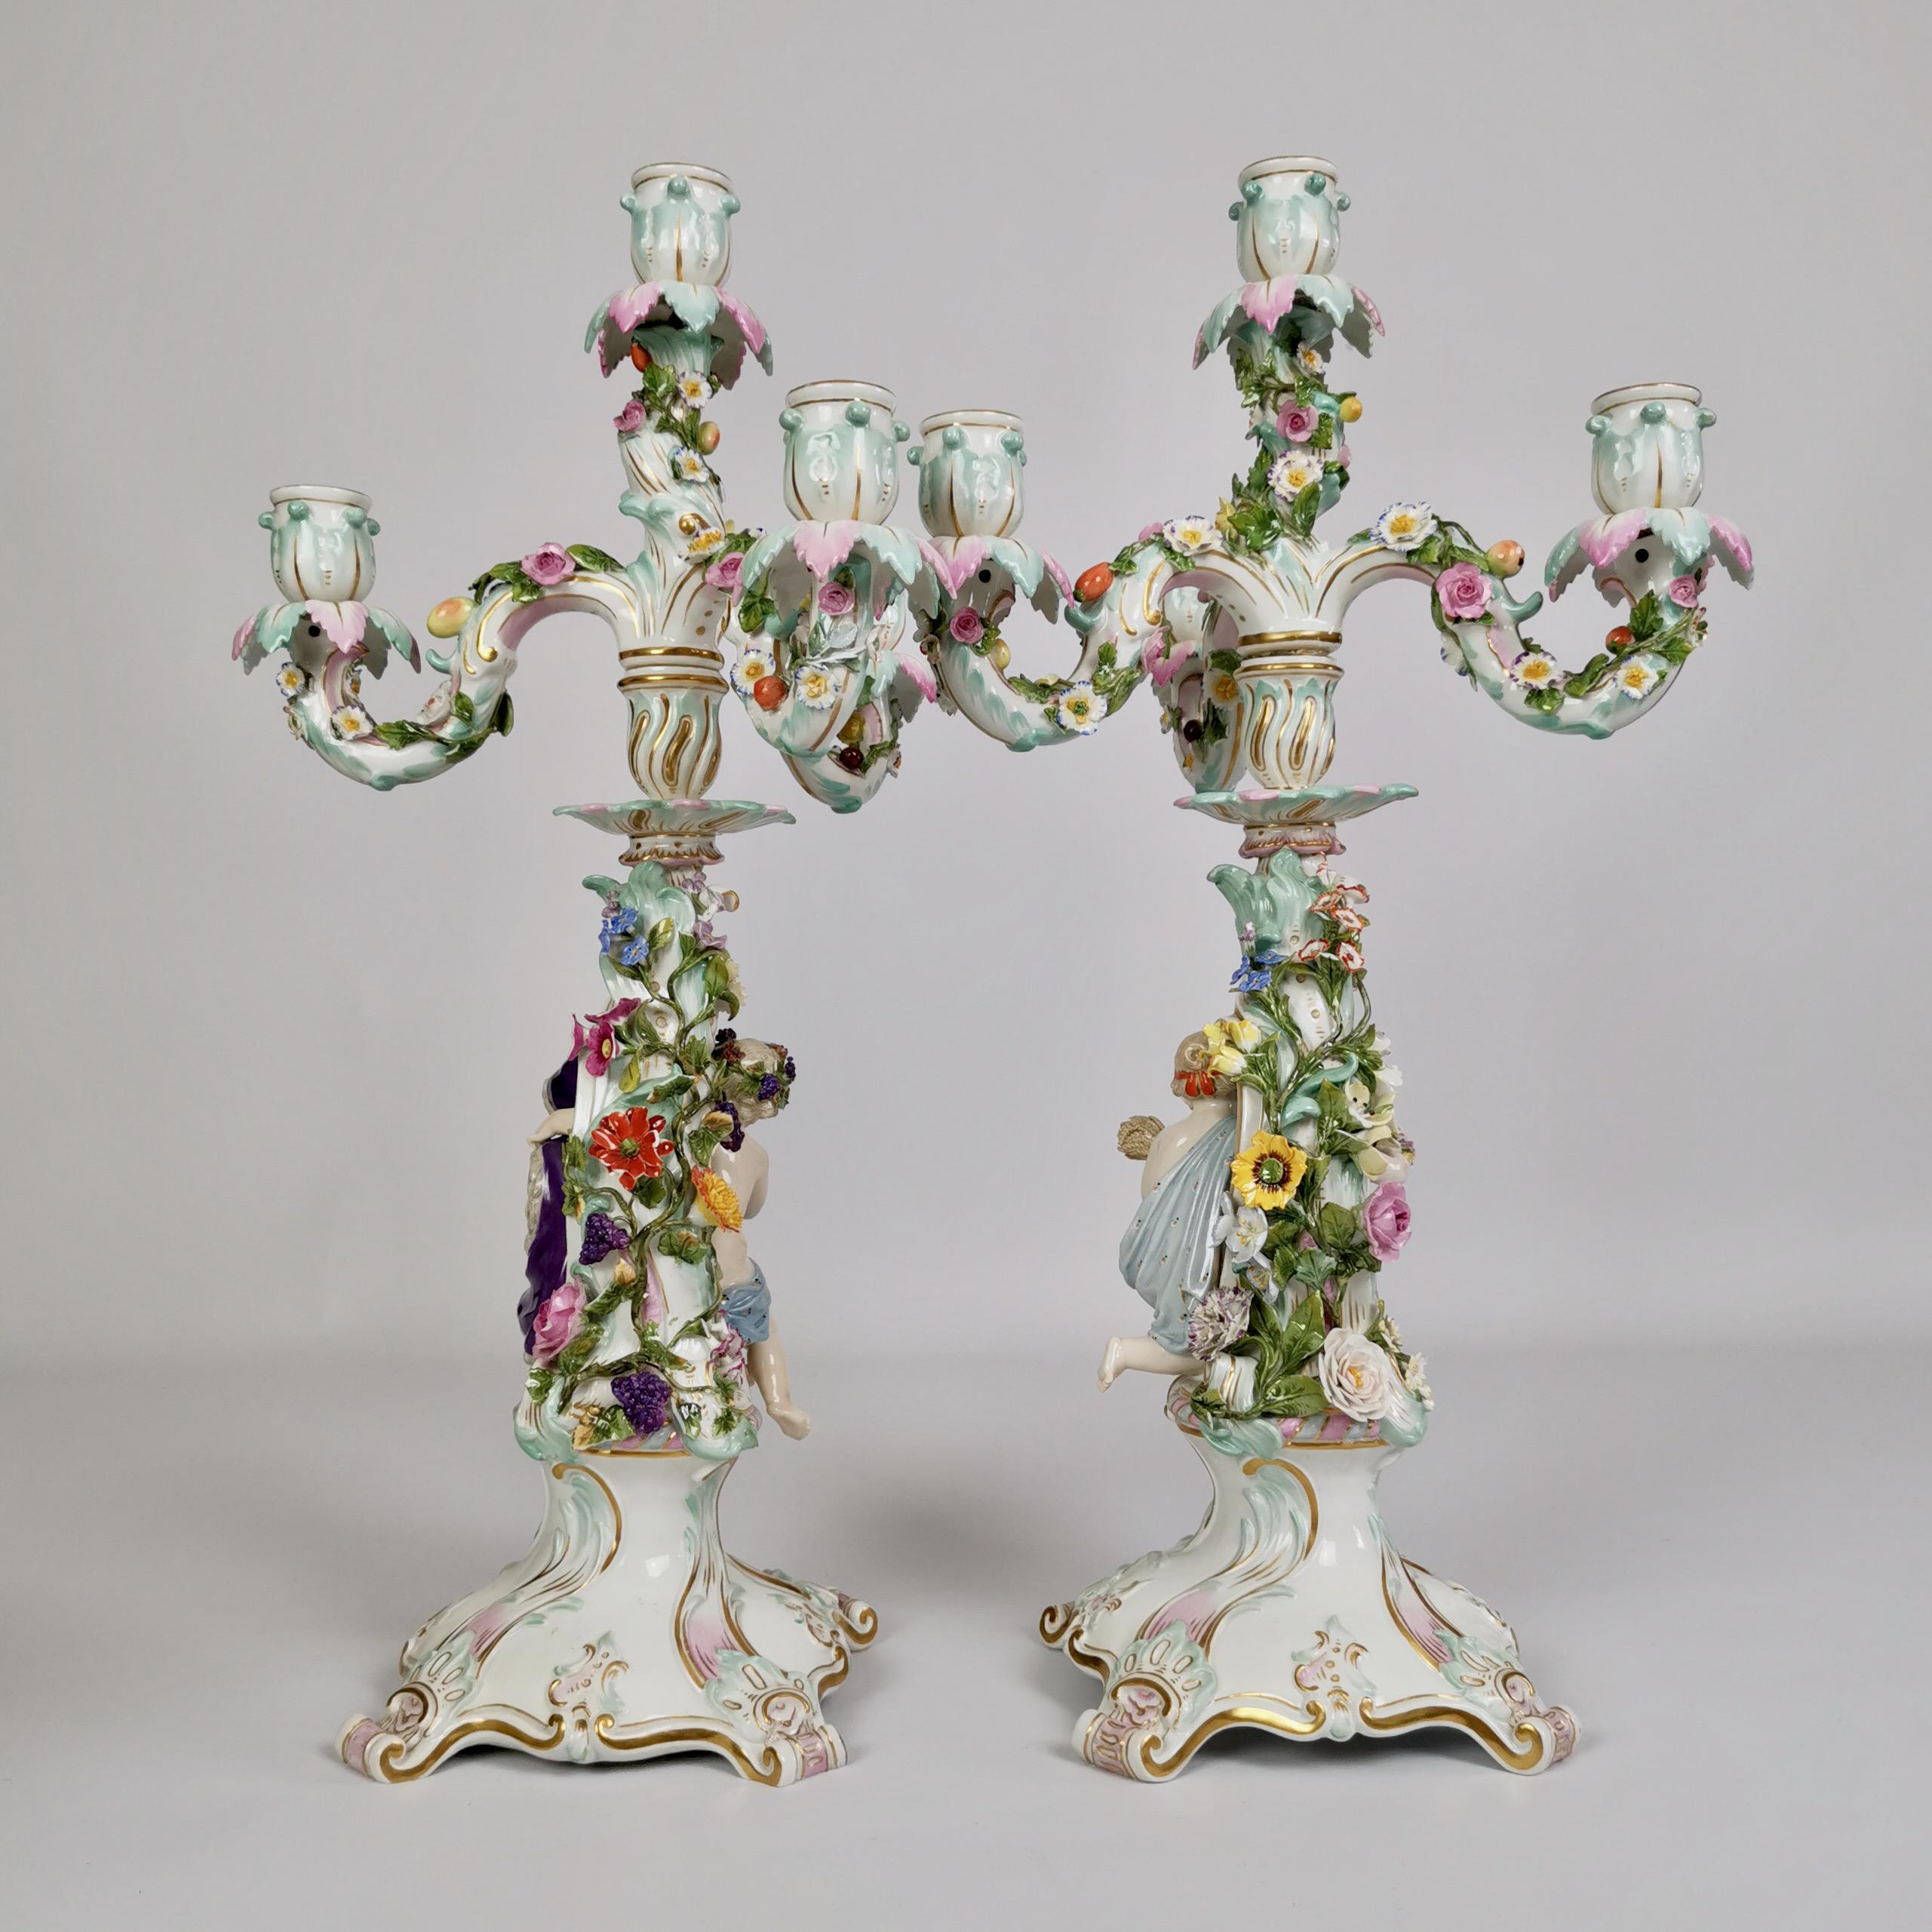 This is a spectacular pair of four-sconce candelabra made by Meissen in the last quarter of the 19th Century. The top parts of the candelabra are loose so they can be cleaned separately. The stems are decorated with beautifully shaped putti figures